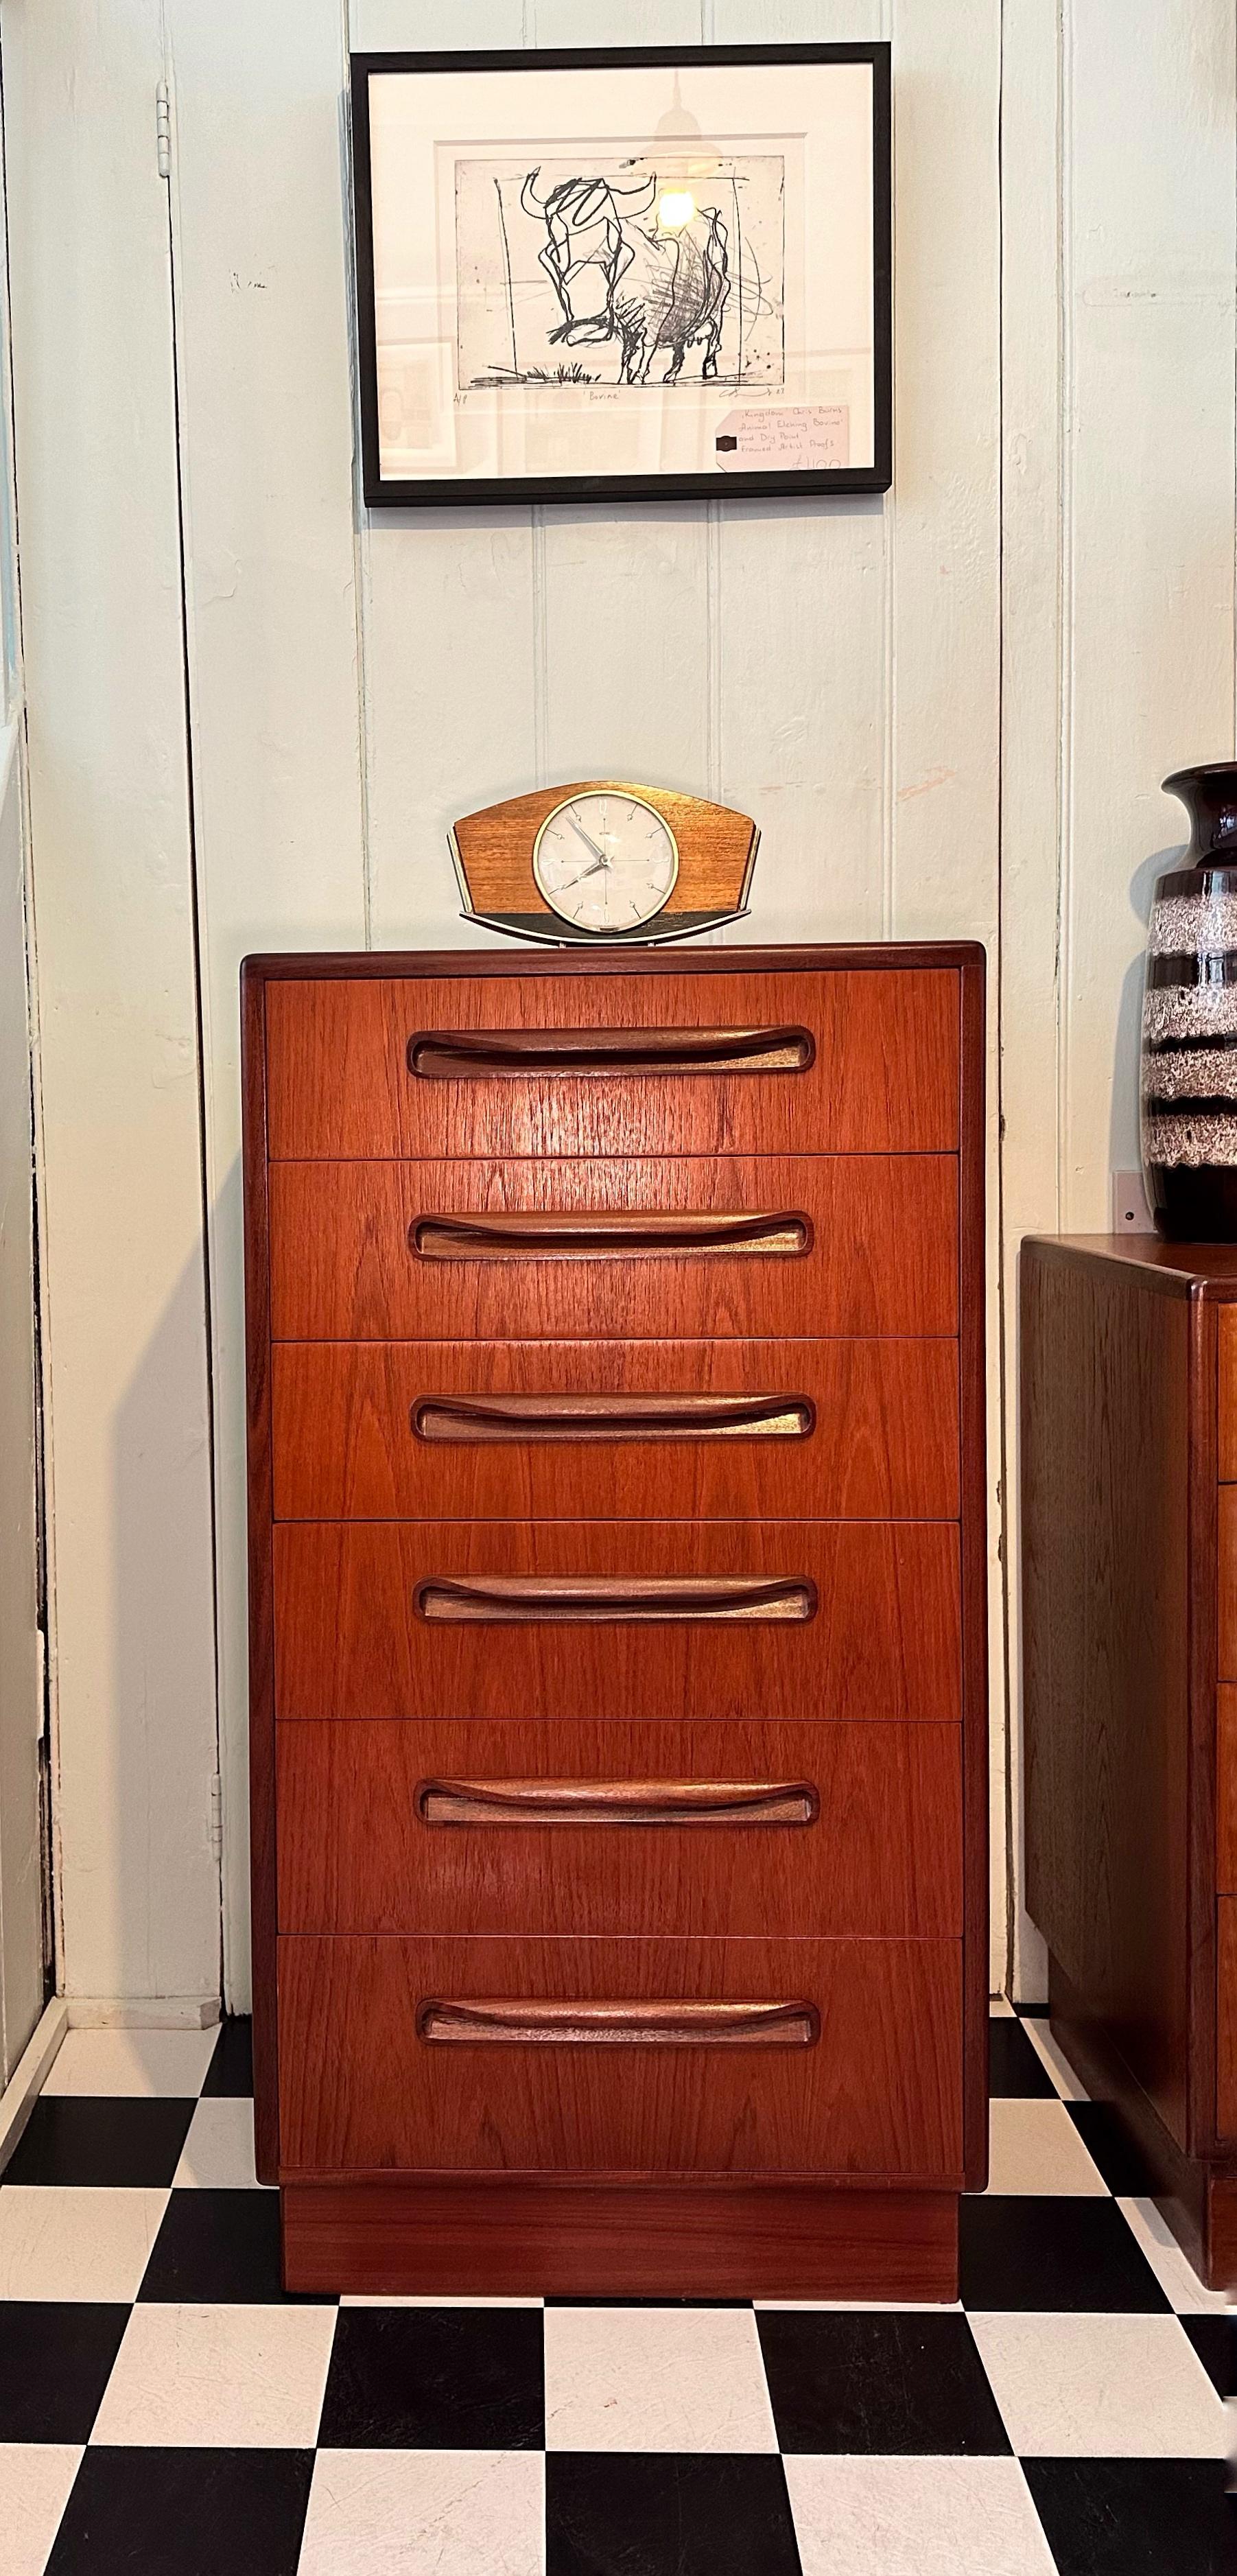 We’re happy to provide our own competitive shipping quotes with trusted couriers. Please message us with your postcode for a more accurate price. Thank you.

Mid Century Modern G Plan Fresco teak chest of drawers / tallboy. Designed in 1960s by